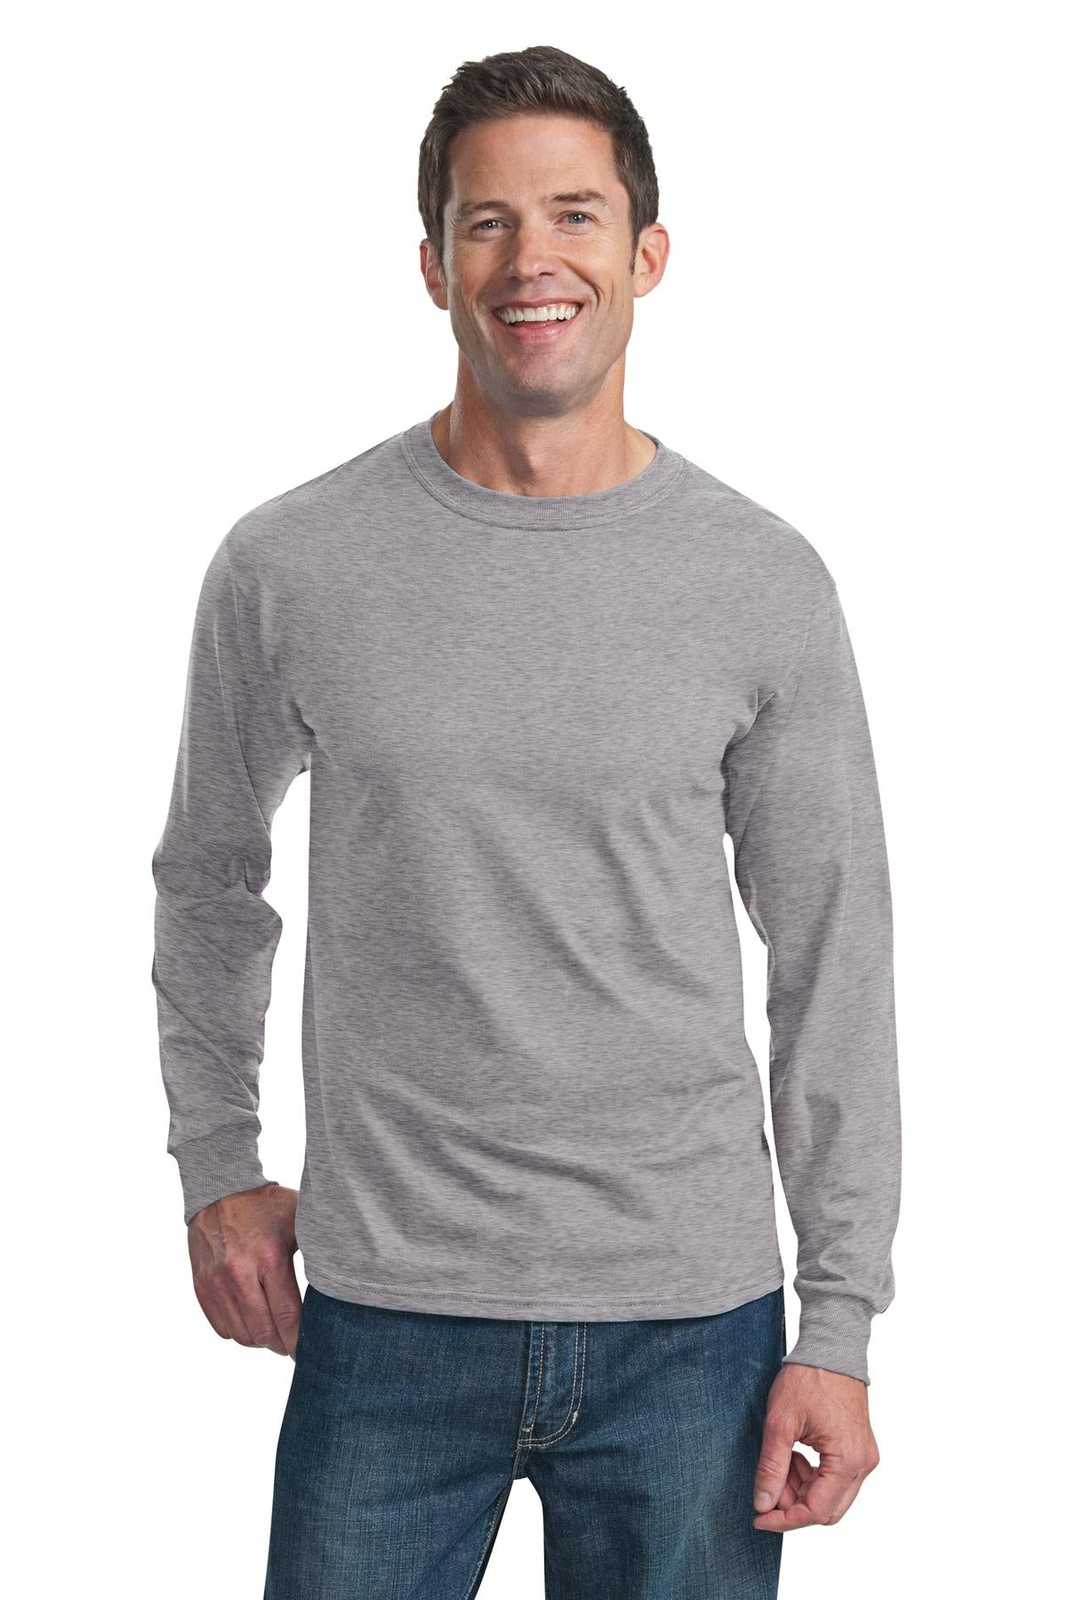 Fruit of the Loom 4930 HD Cotton 100% Cotton Long Sleeve T-Shirt - Athletic Heather - HIT a Double